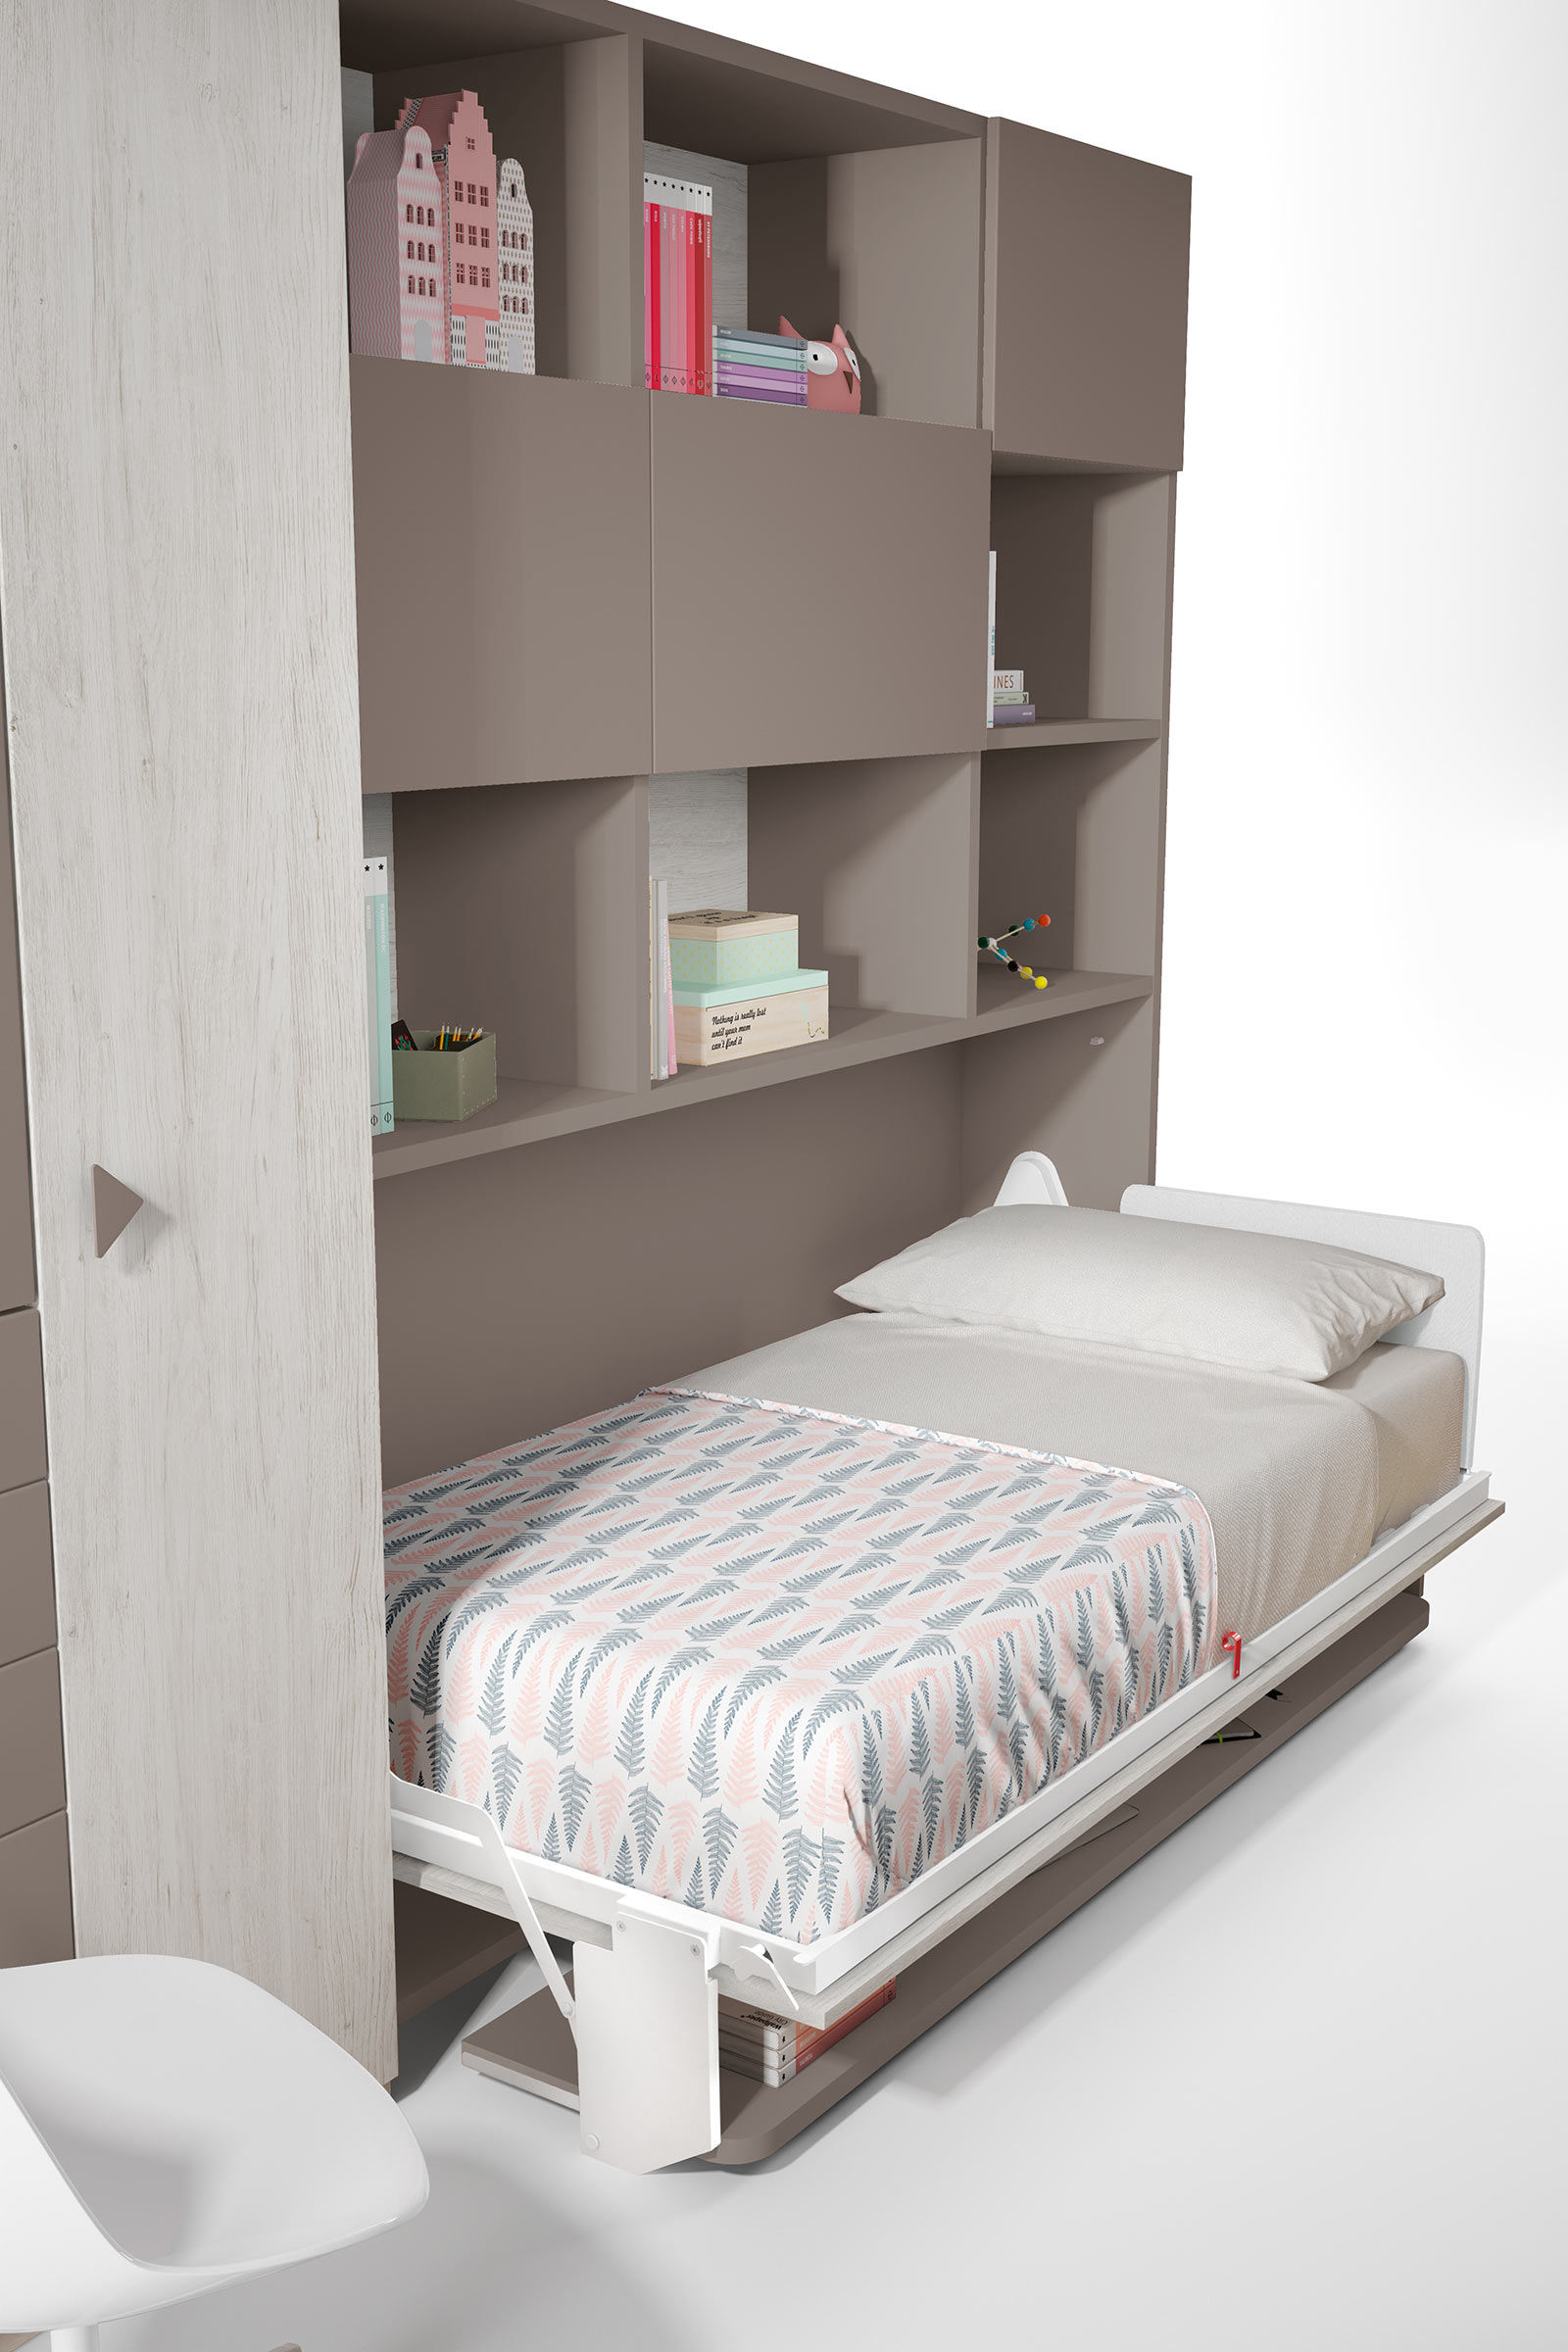 Space Deskbed The London Wallbed Company, Single Wall Bed With Desk Uk